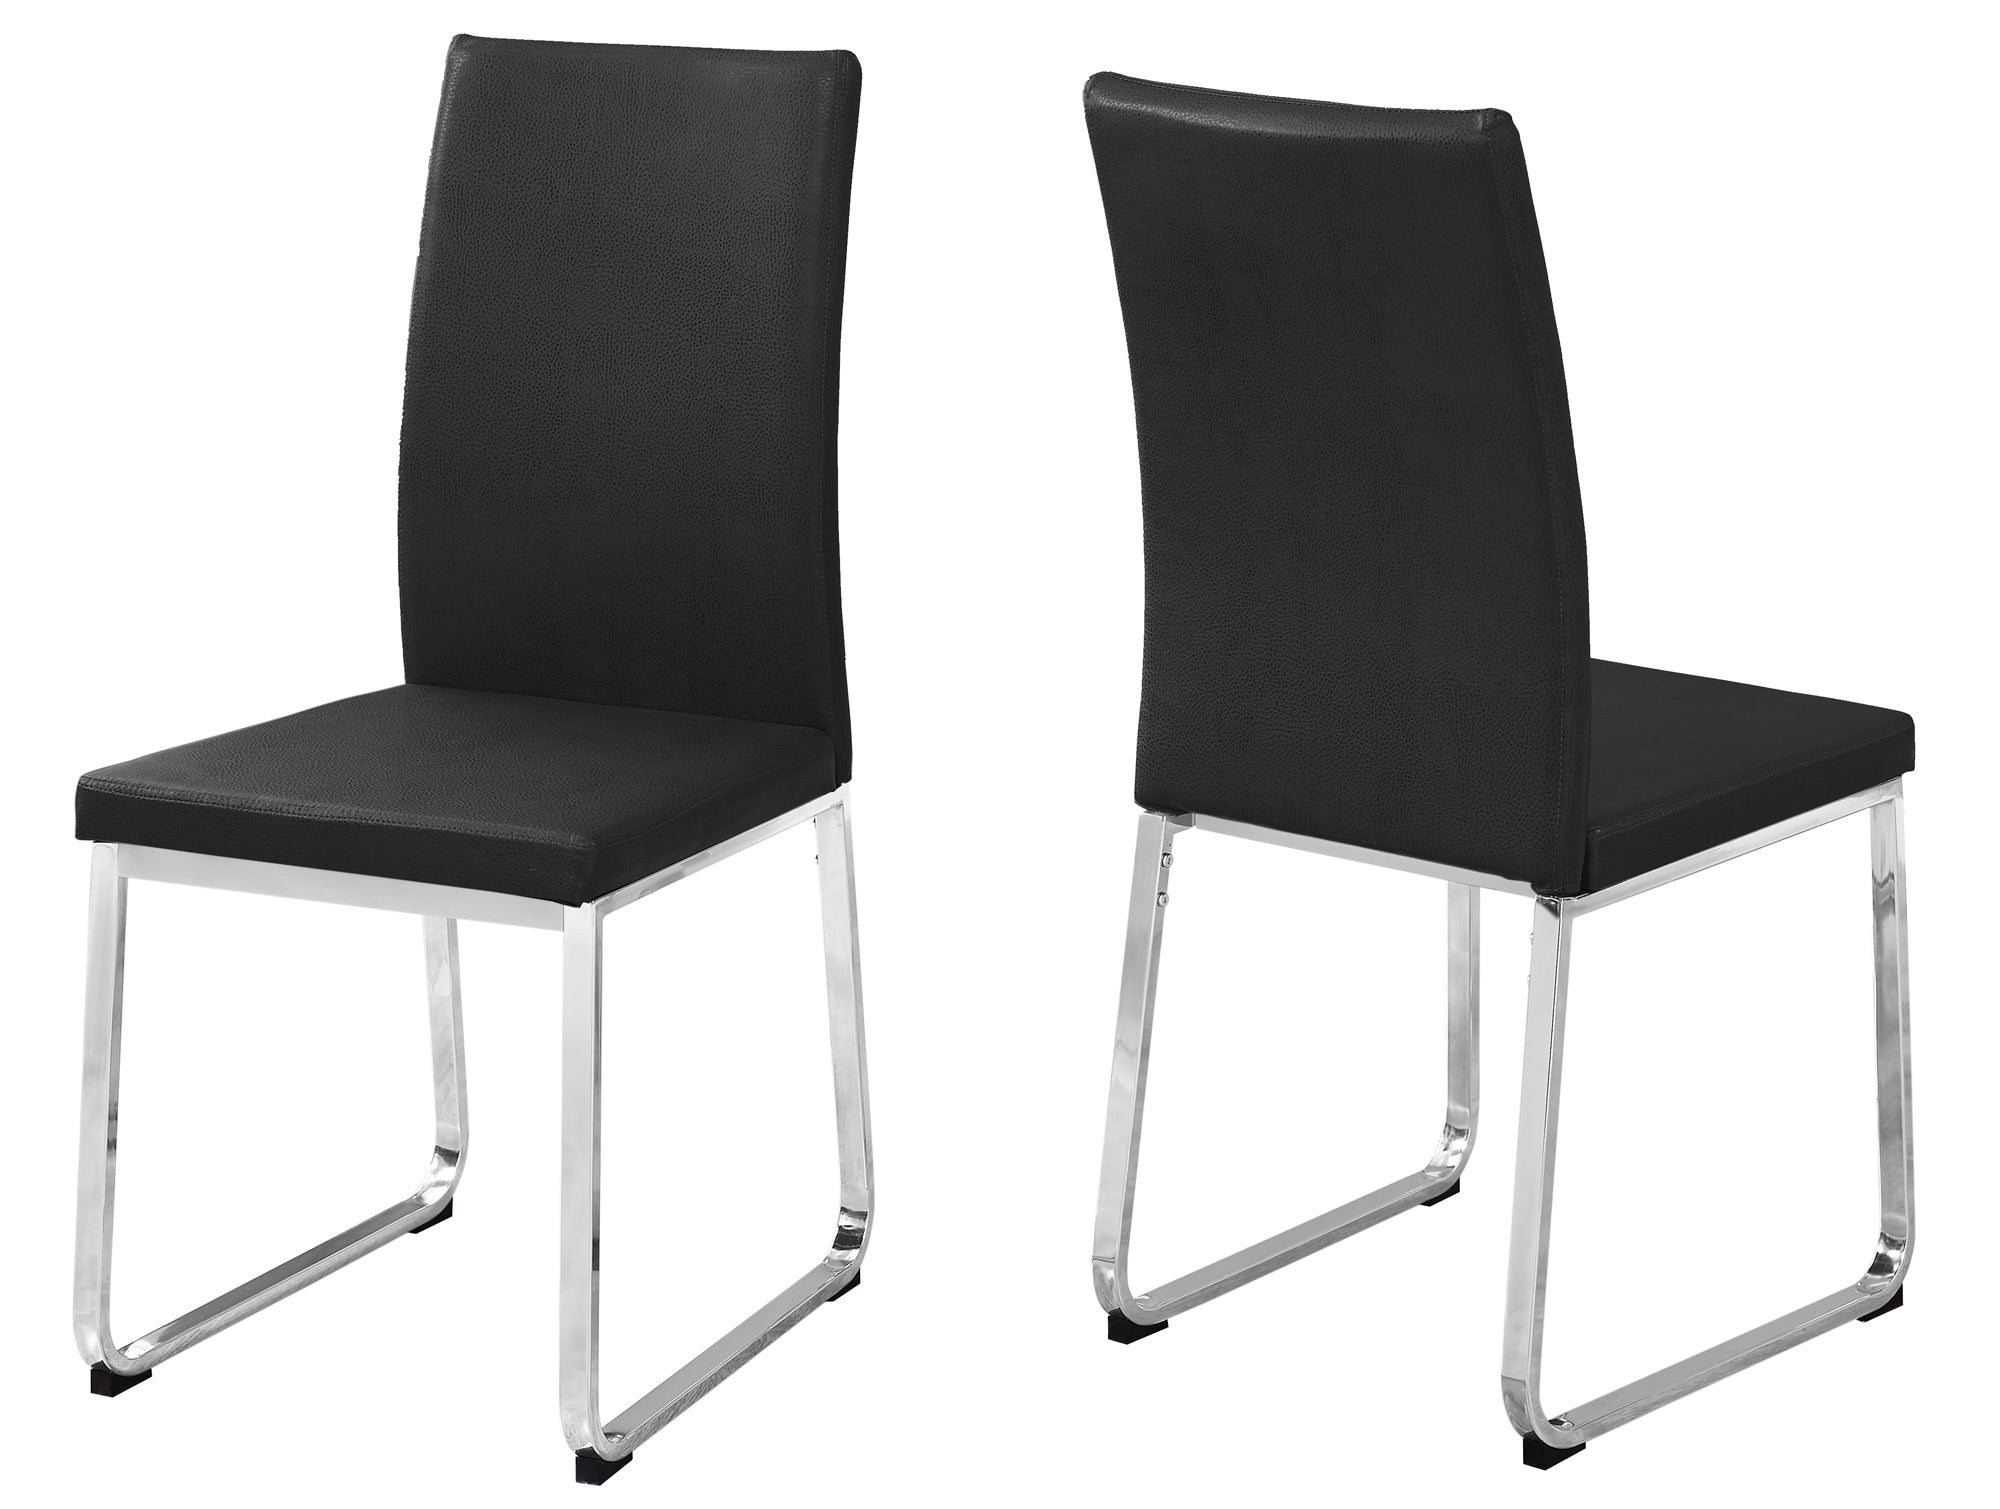 Dining Chair - 2Pcs / 38H / Black Leather-Look / Chrome